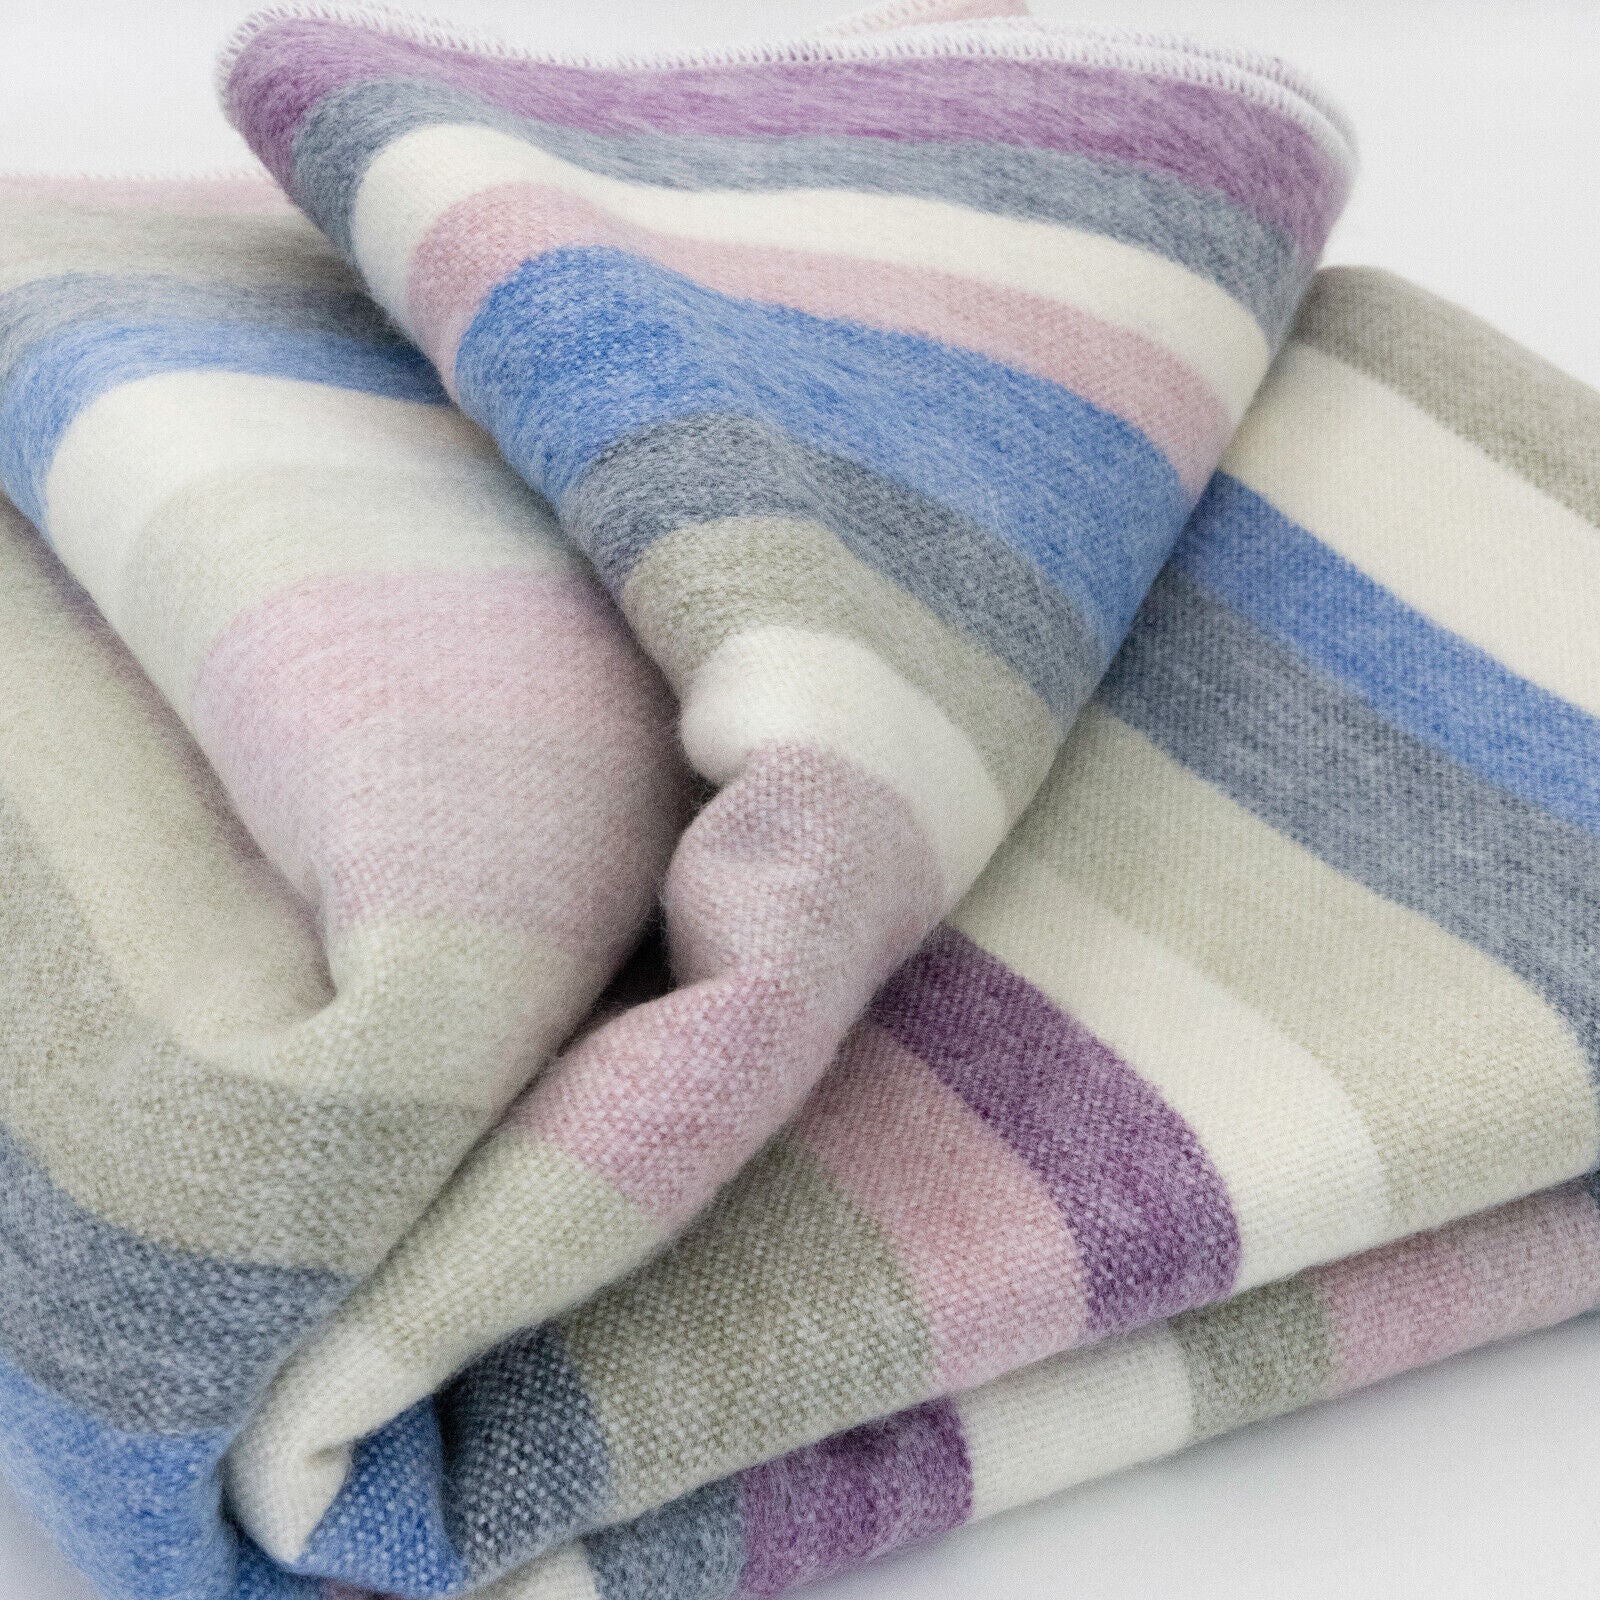 Yunga - Queen-Sized Baby Alpaca Wool Throw Blanket/Sofa Cover - 95 x 65 in - Pastel Dreams - Soft Pink/Blue/Purple Hues